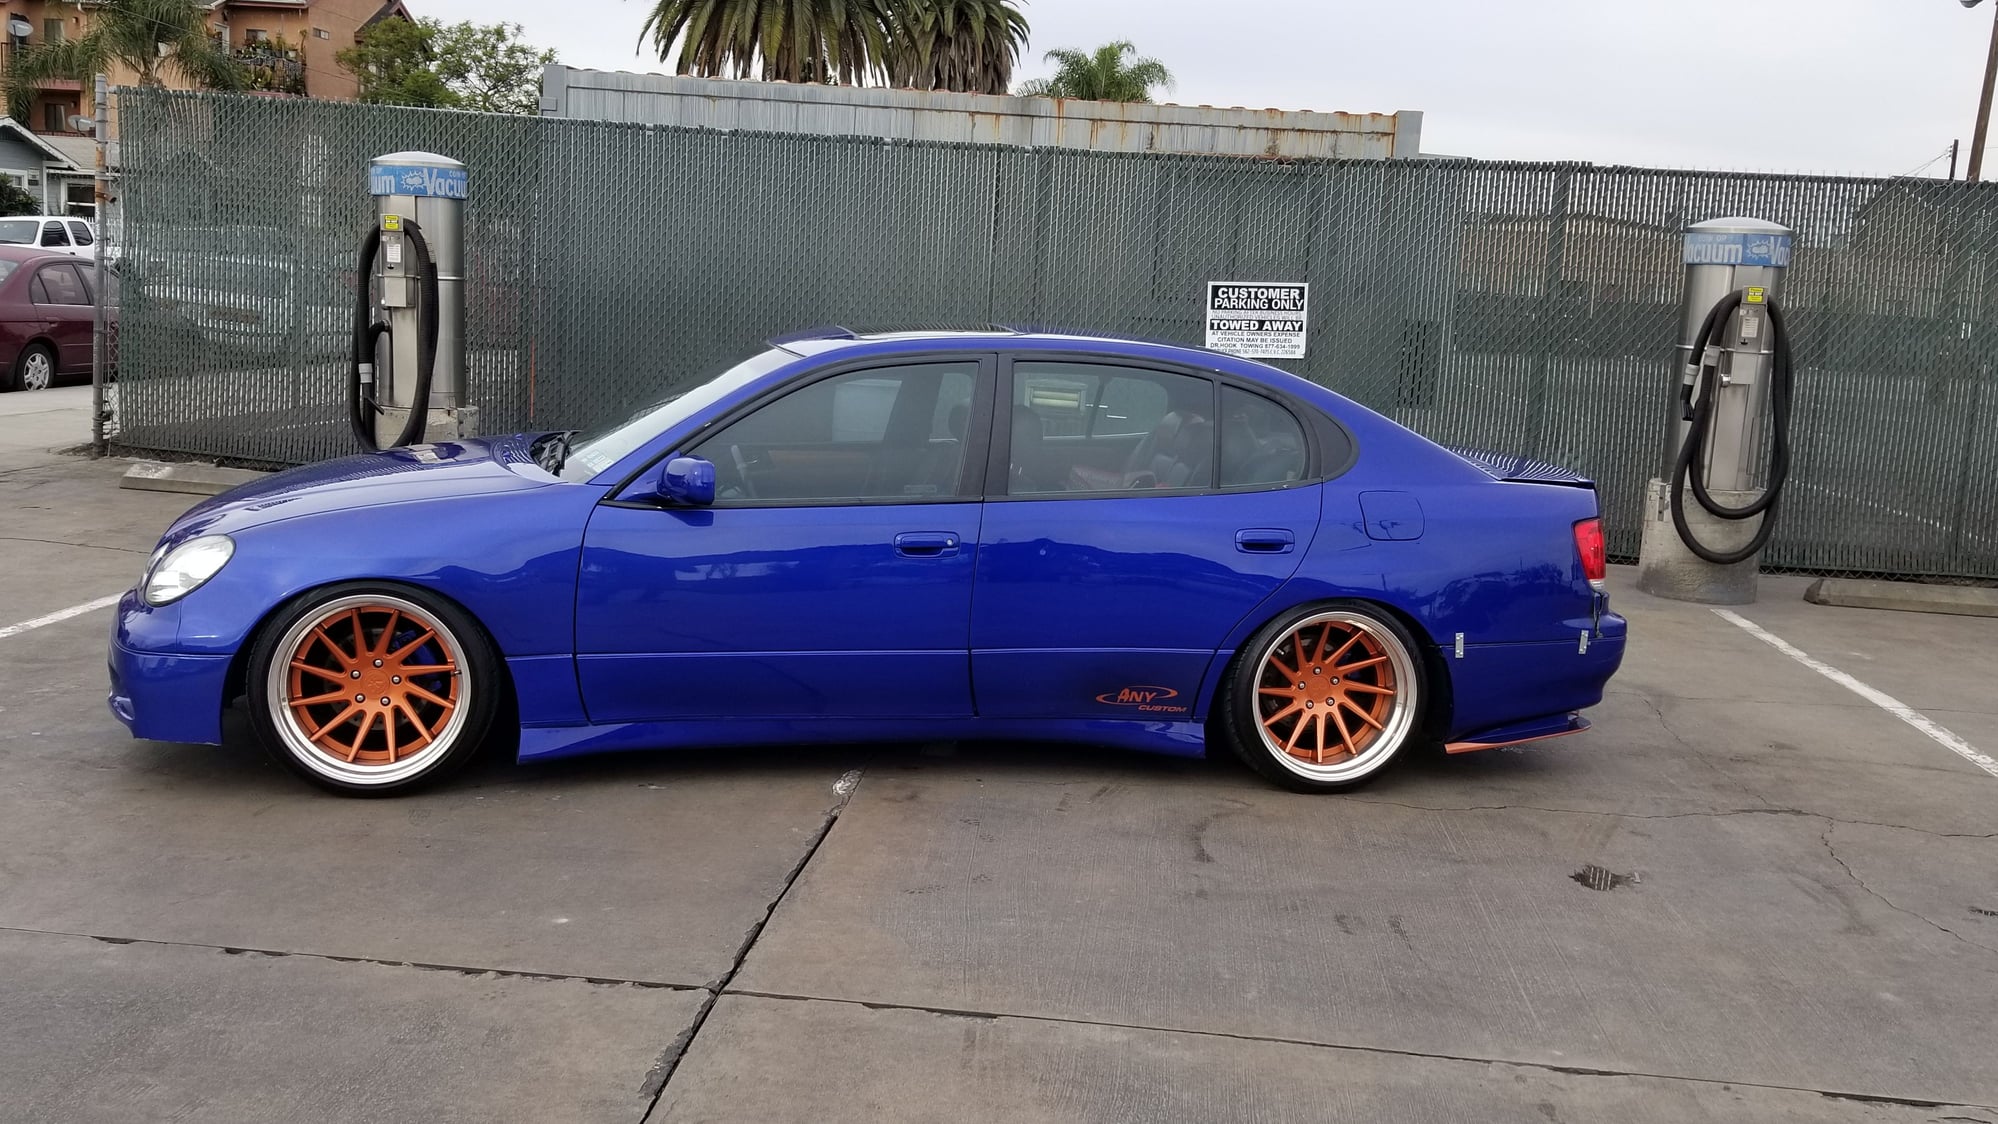 2000 Lexus GS300 - Widebody GS former show car for sale - Used - VIN Jt8bd68s0y0107517 - 200,000 Miles - 6 cyl - 2WD - Automatic - Sedan - Blue - Garden Grove, CA 92840, United States